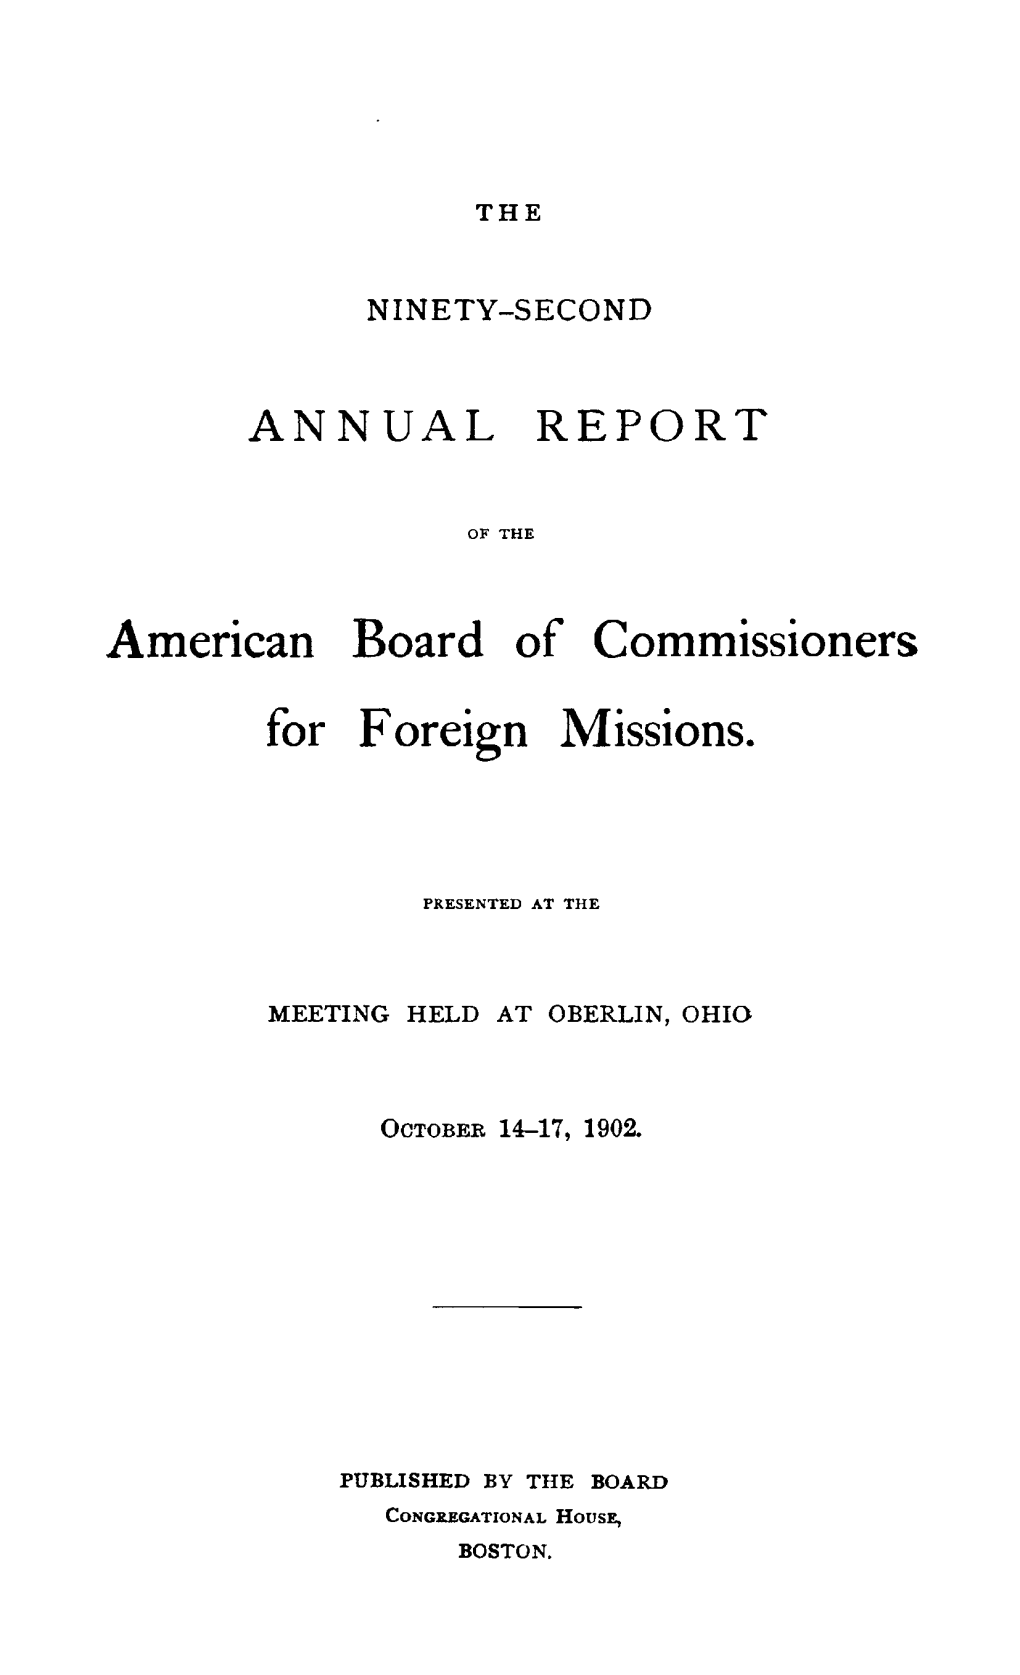 American Board of Commissioners for Foreign Missions